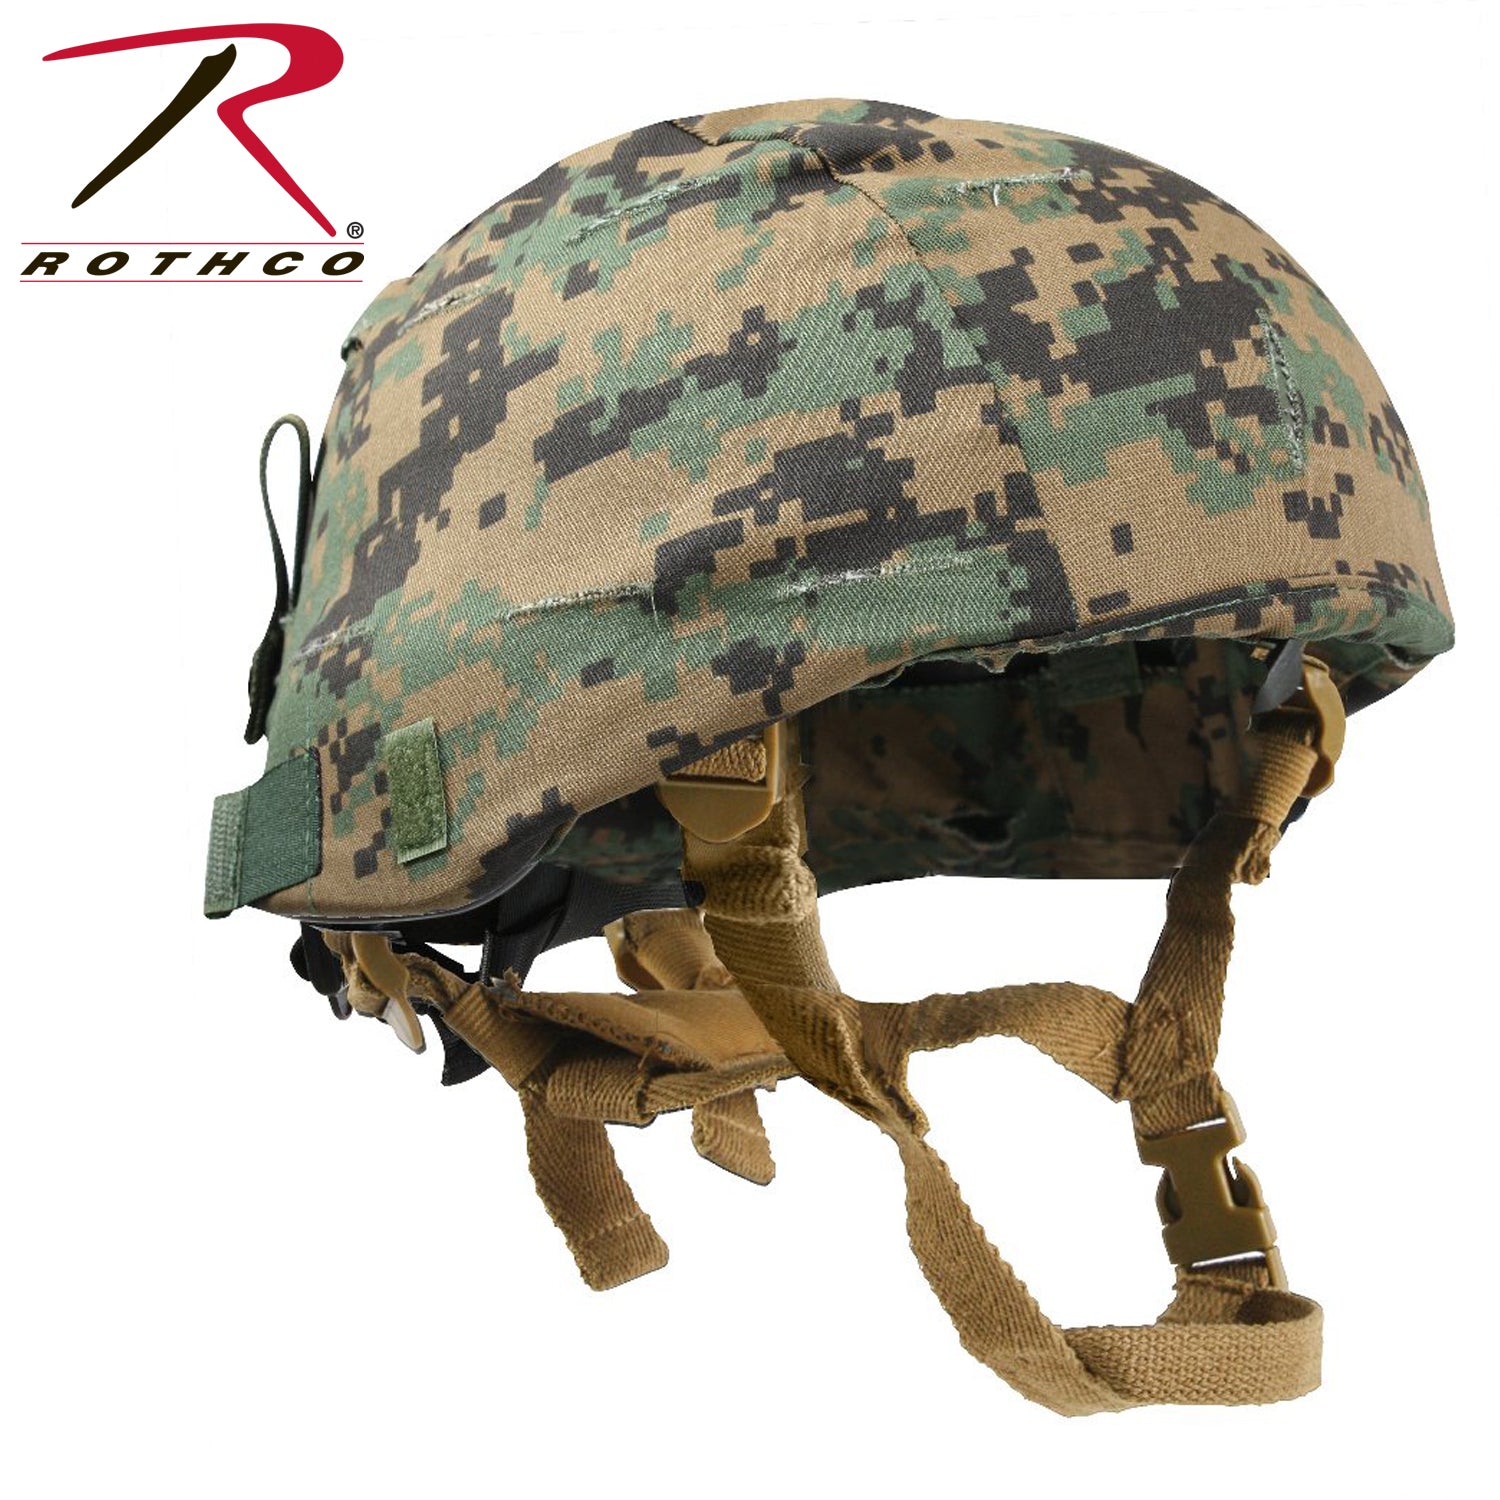 Rothco Chin Strap For MICH Helmet - Tactical Choice Plus